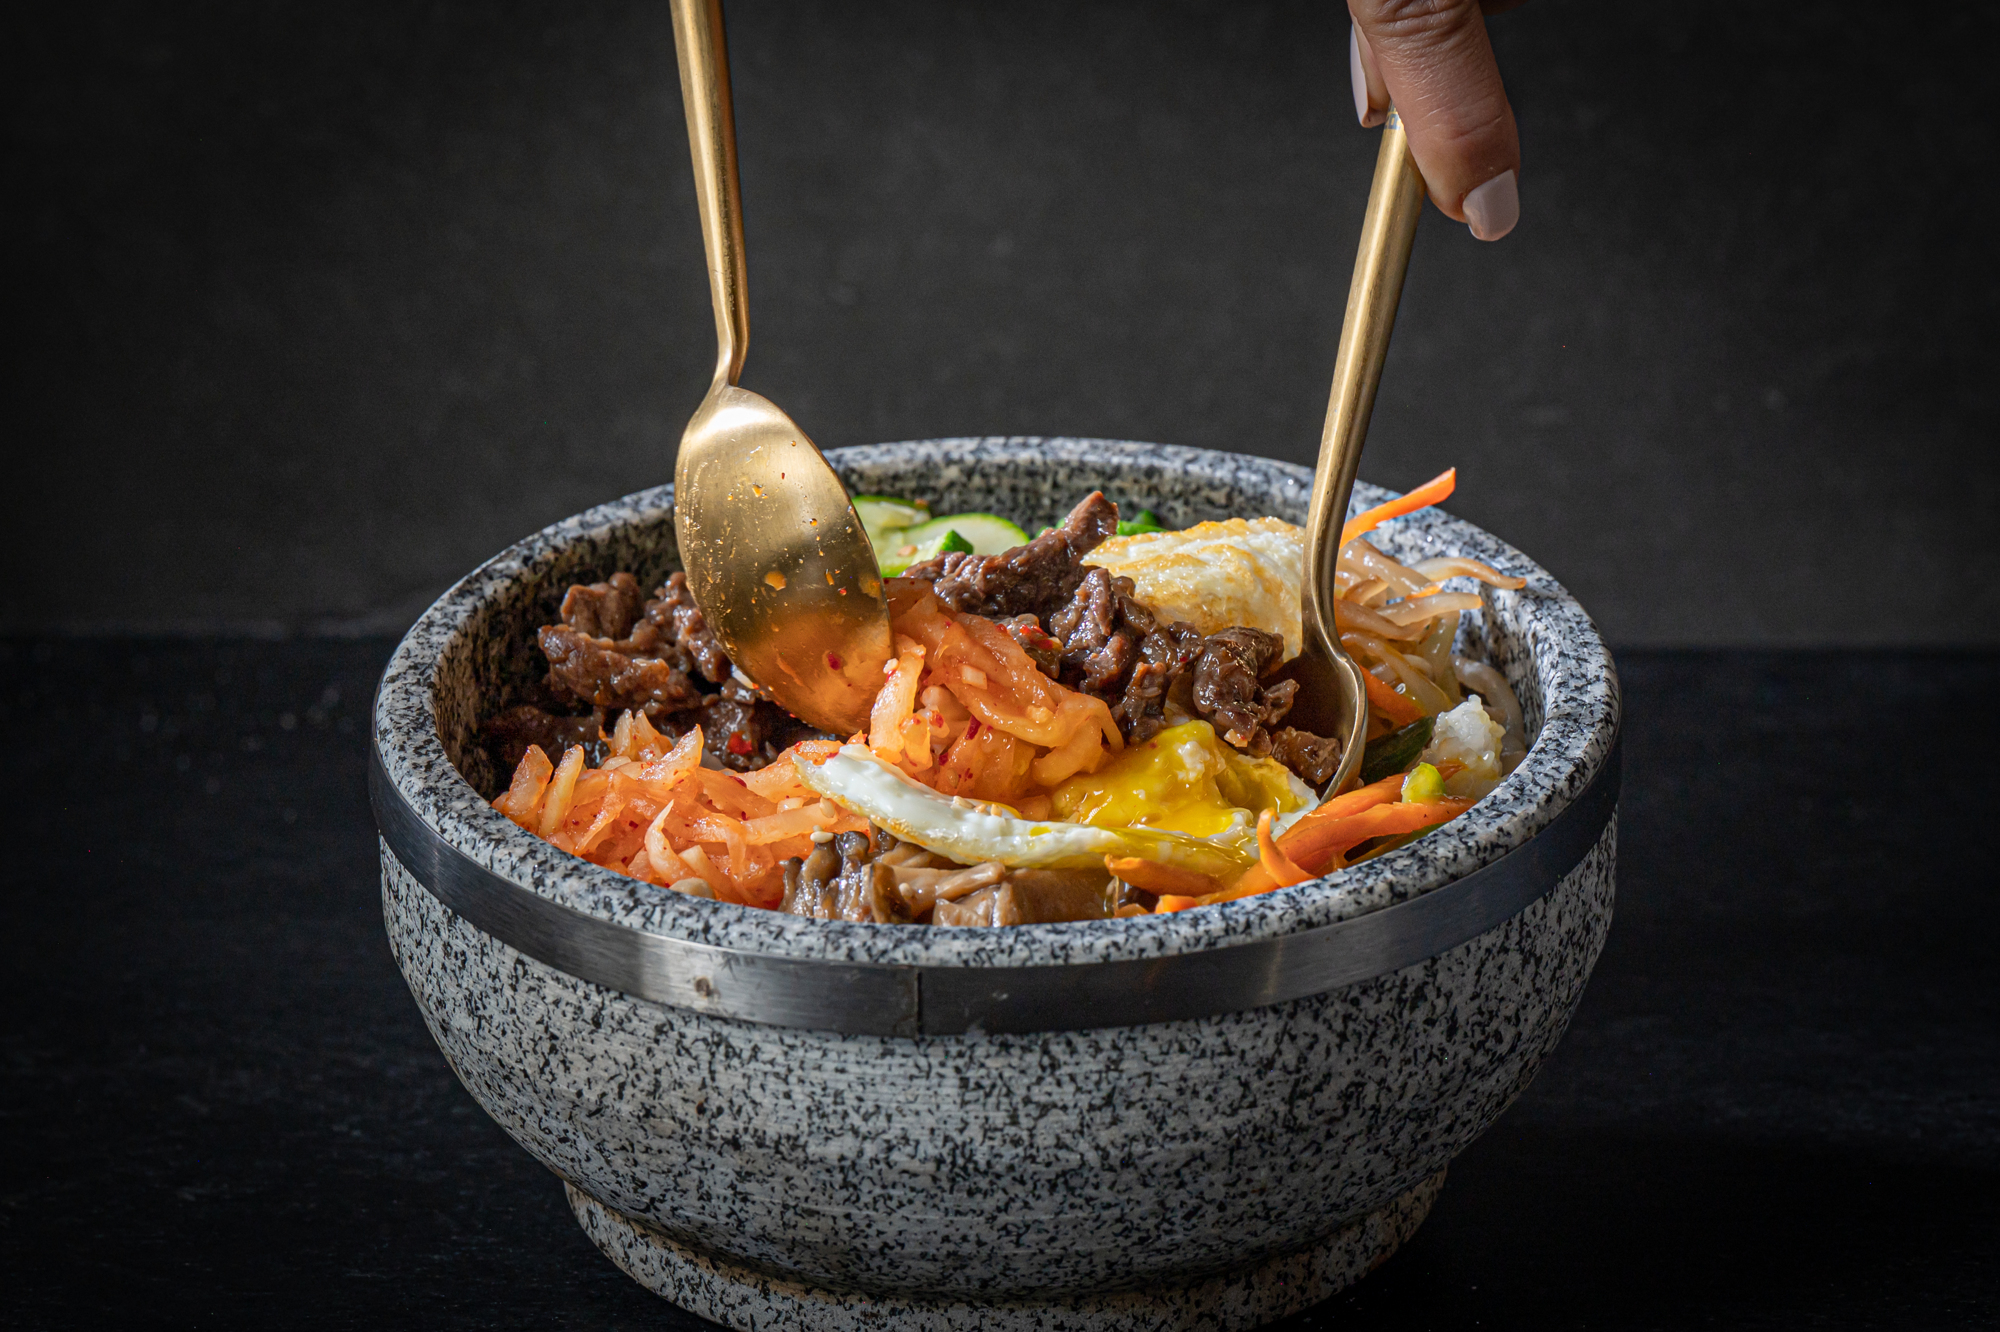 Jump start your evening with a feast at Korê Steakhouse, which features authentic Korean dishes. (Courtesy photo)